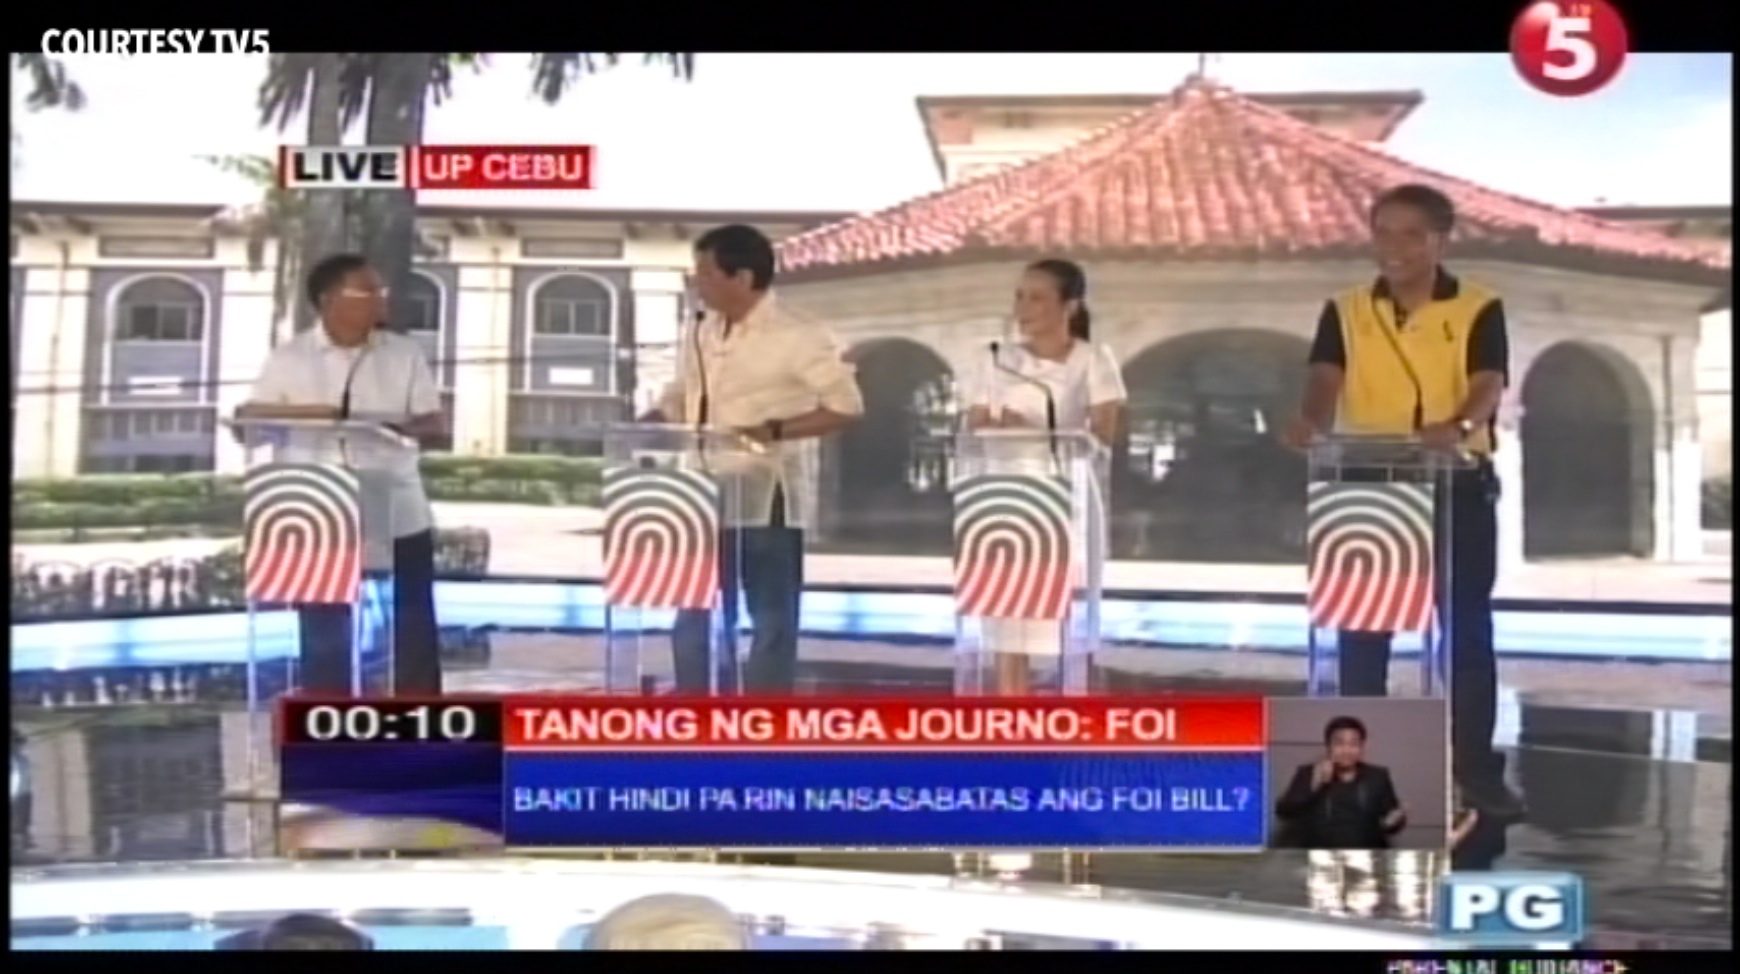 BANTER OR DEBATE. Four presidential candidates square off in the Cebu presidential debate on March 20, 2016. Screengrab from TV-5 